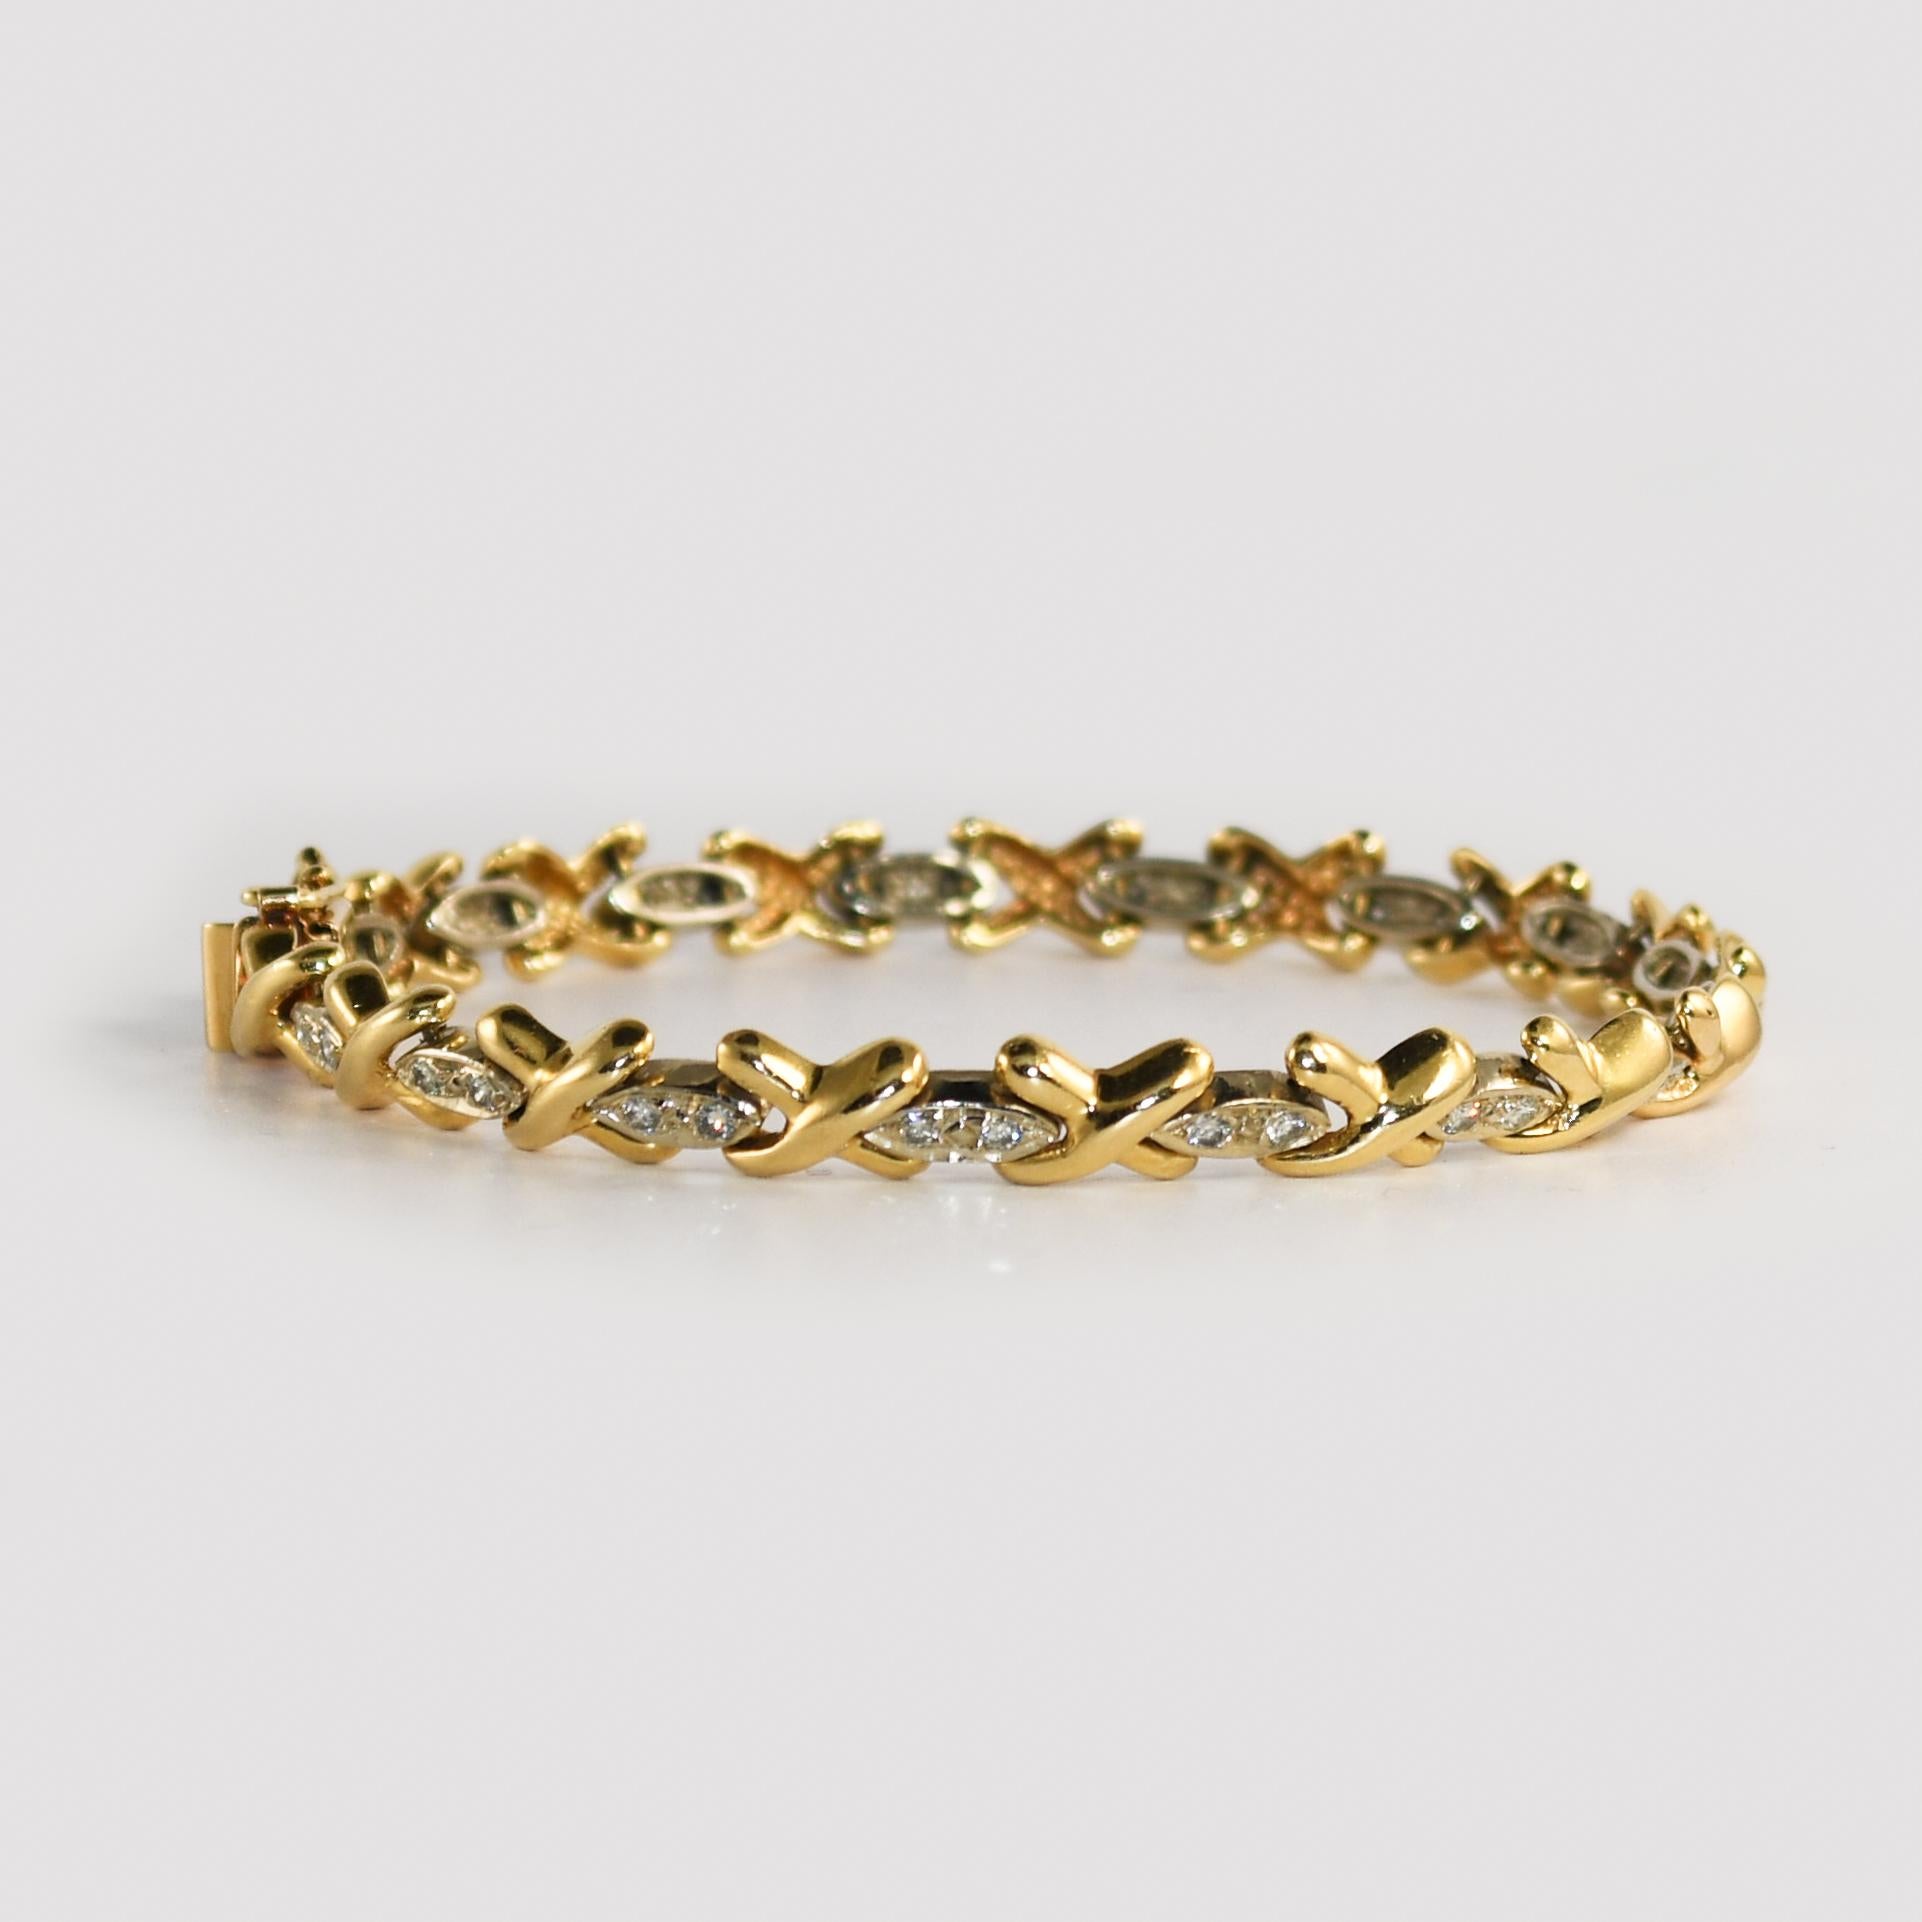 14k Two Tone Yellow and White Gold Bracelet .79cts TCW – Length 7.5 In Excellent Condition For Sale In Laguna Beach, CA